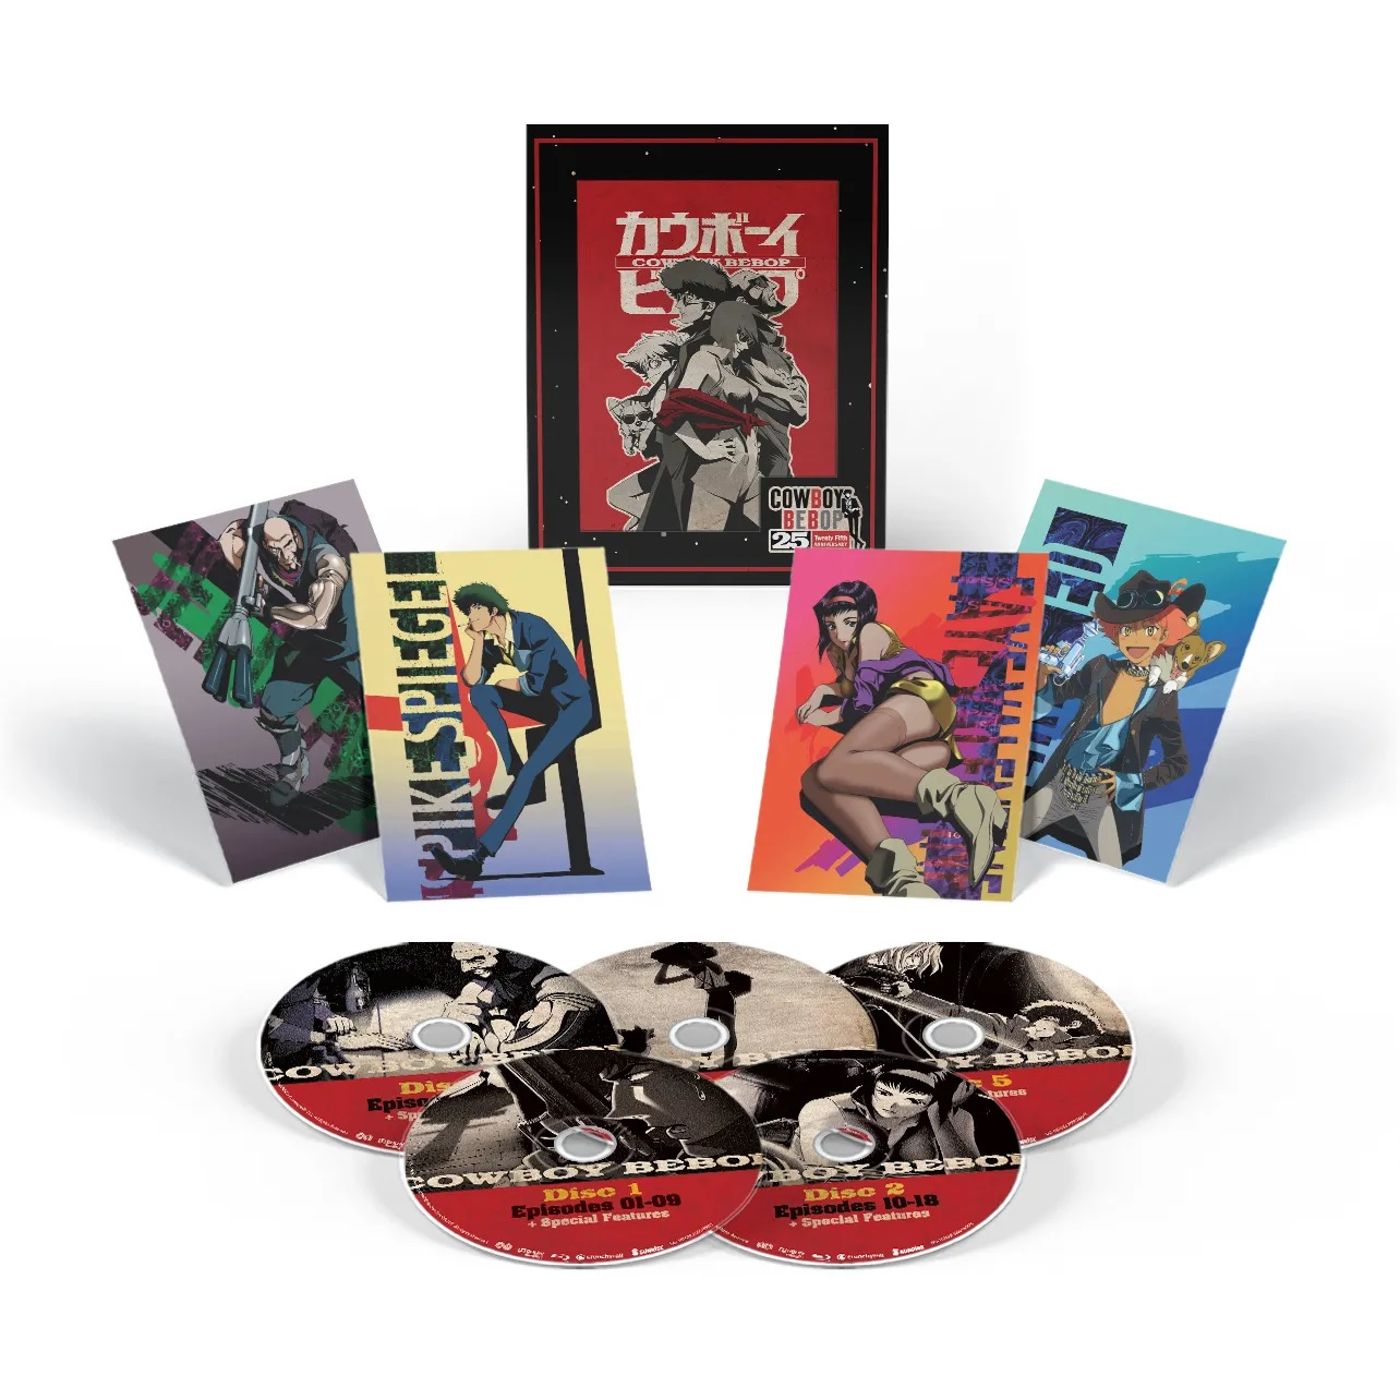 Cowboy Bebop Gets New Special Edition Blu-Ray for Its 25th Anniversary